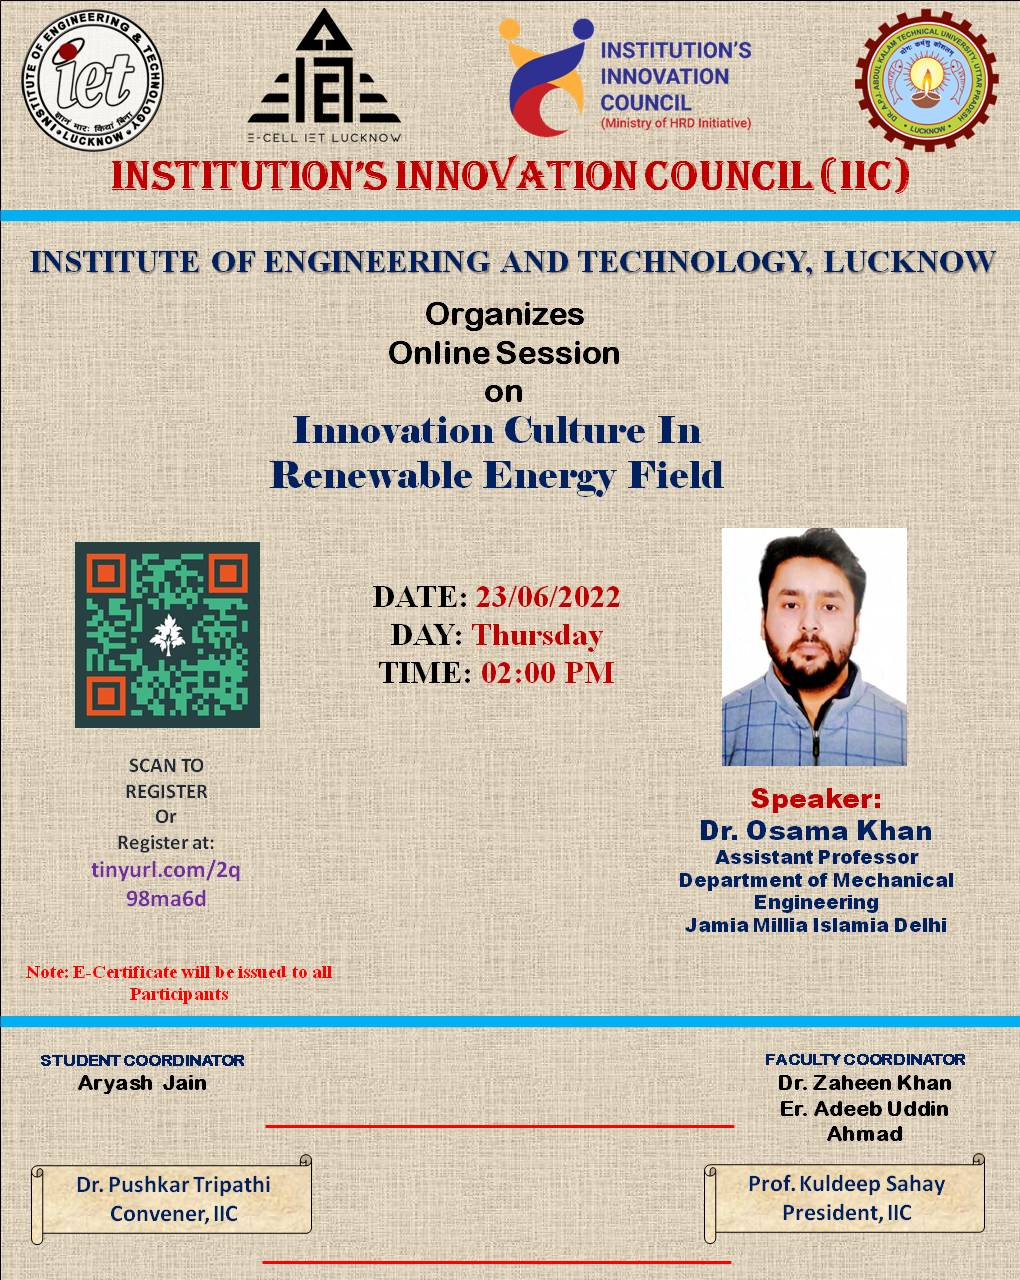 online session on "Innovation Culture In Renewable Energy Field"